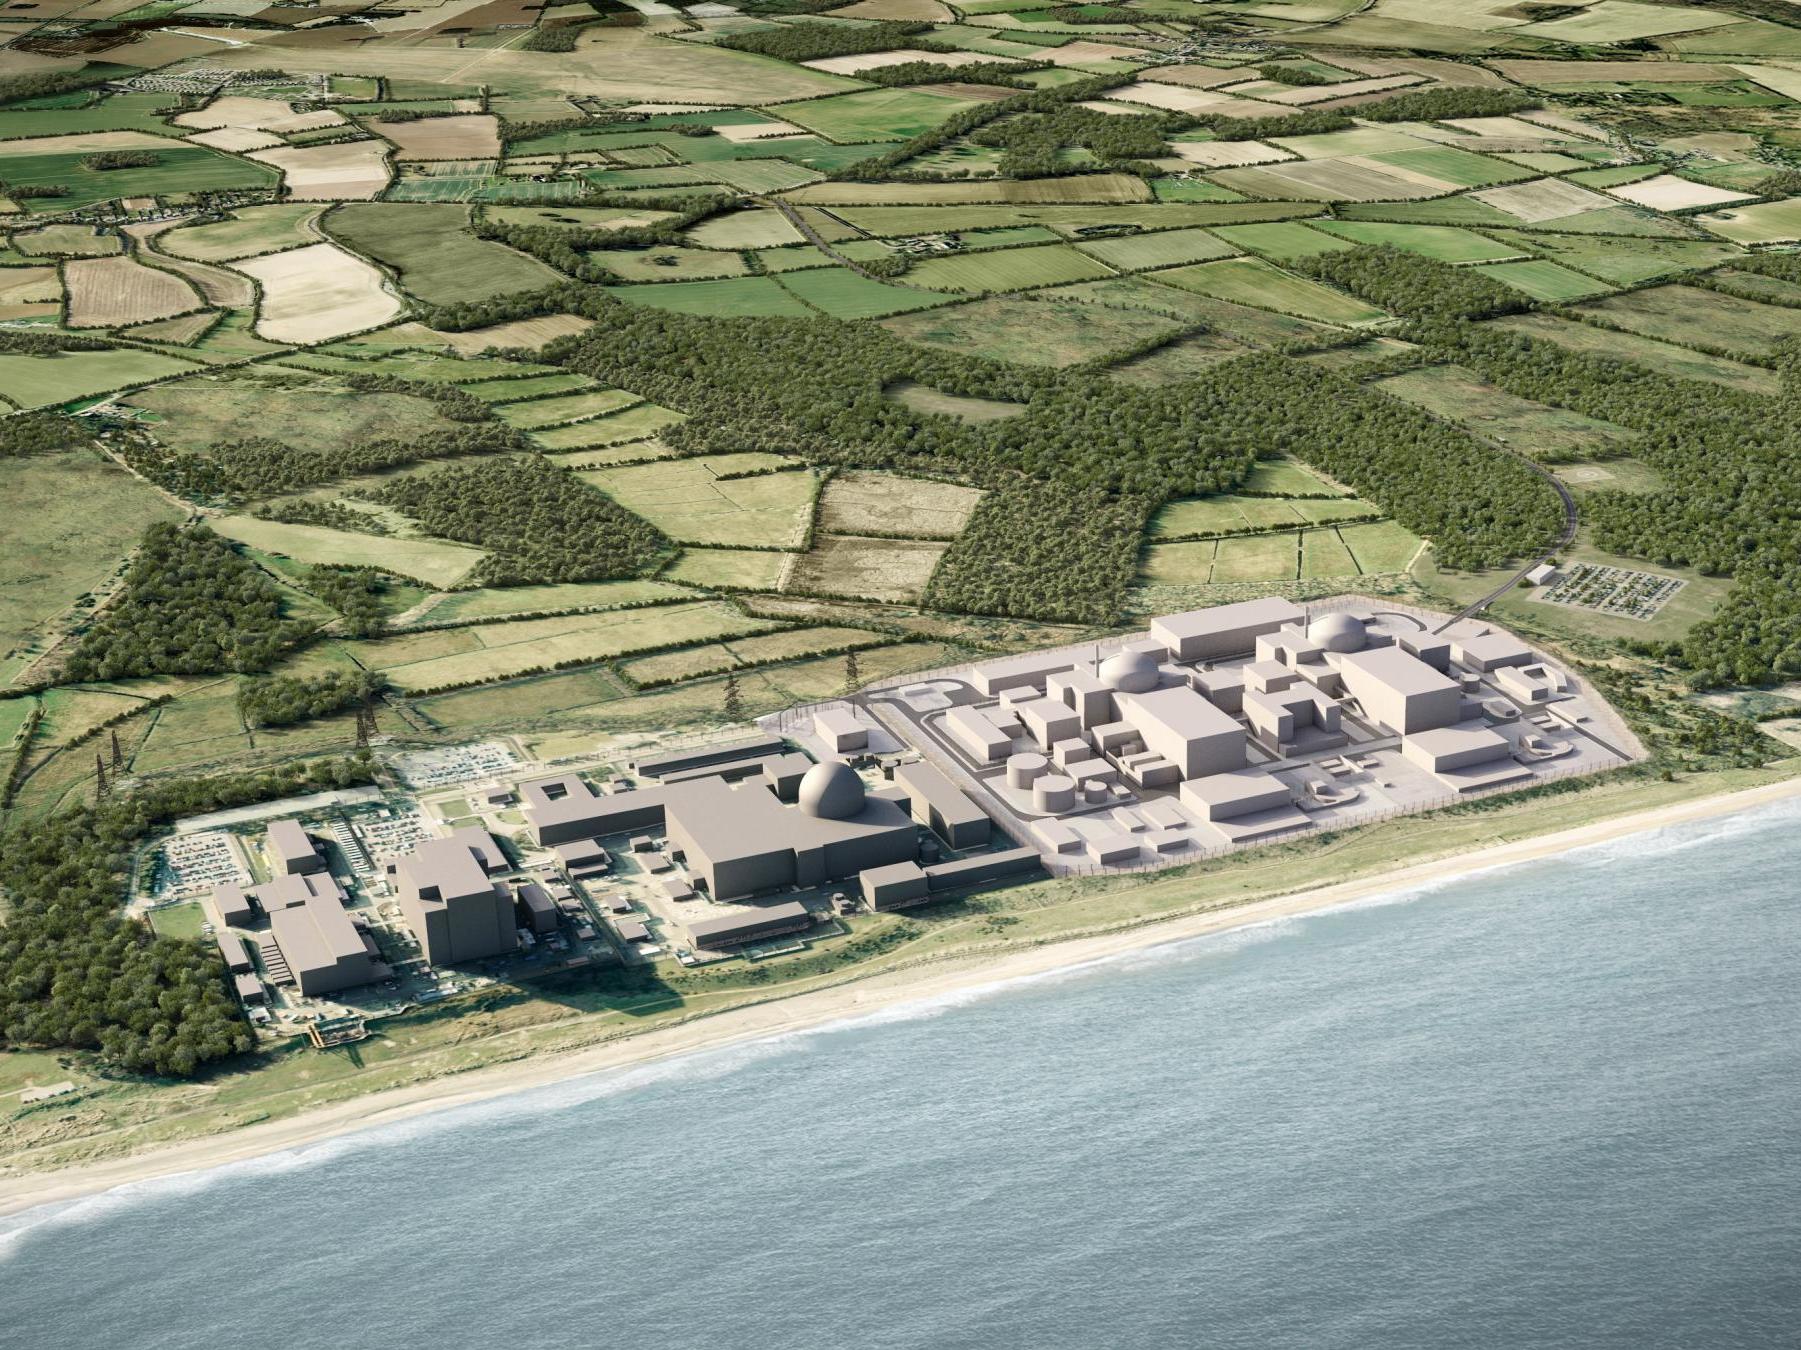 The proposed Sizewell C nuclear power plant could cost £20bn